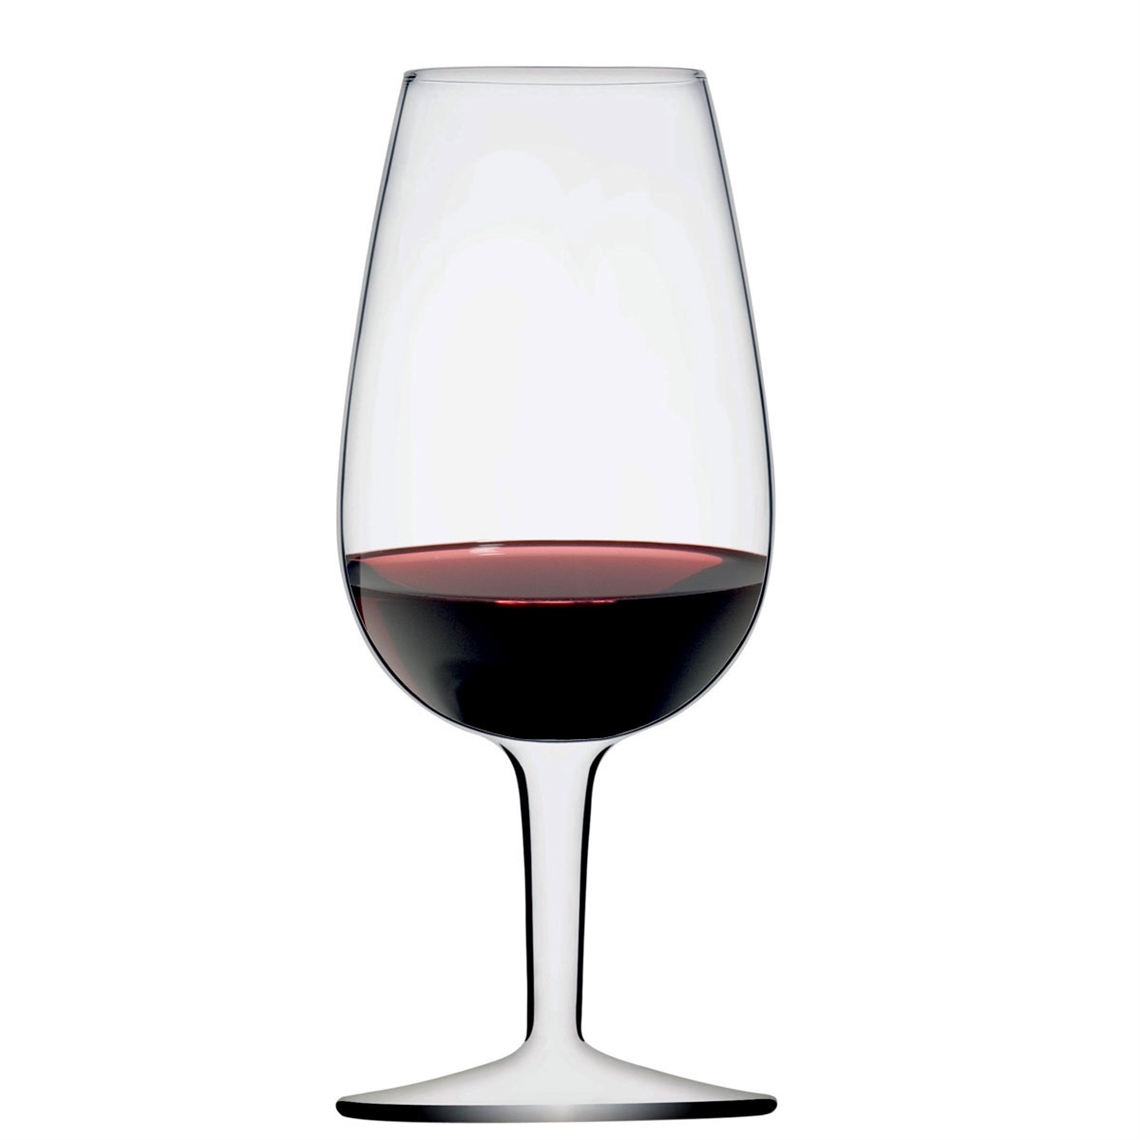 View more wine tasting accessories from our Wine Tasting Glasses range